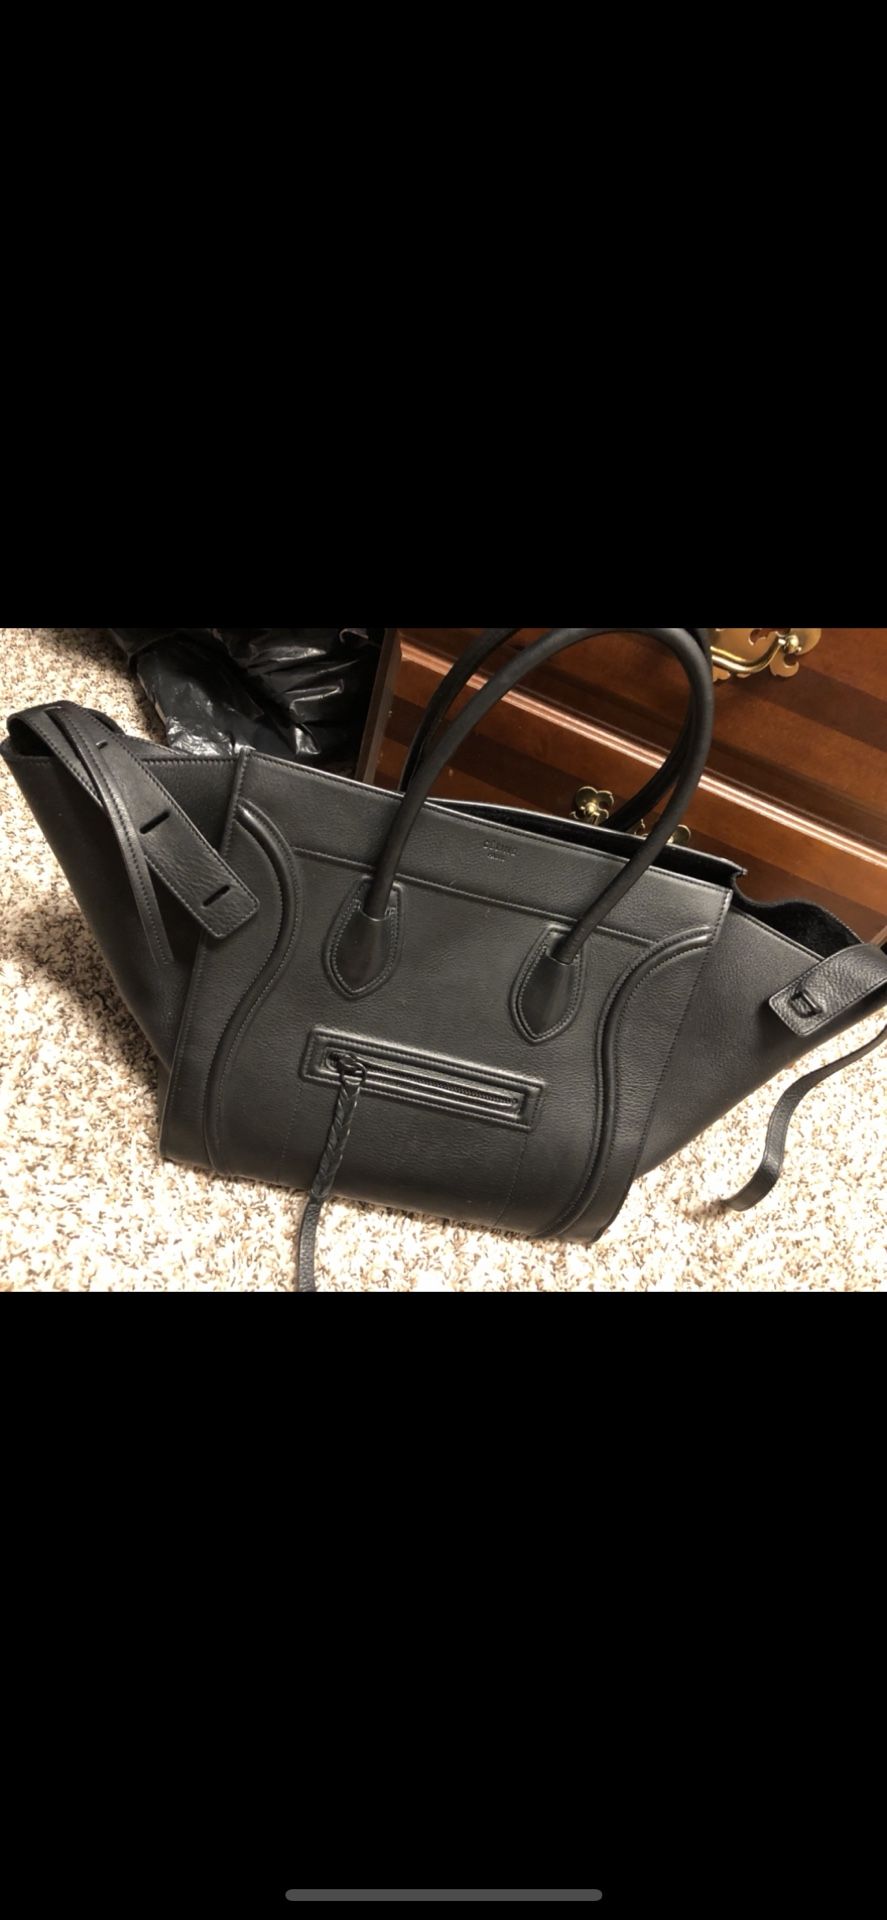 Authentic Celine Phantom Bag (large) great condition, (all black) will trade for authentic Chanel bag